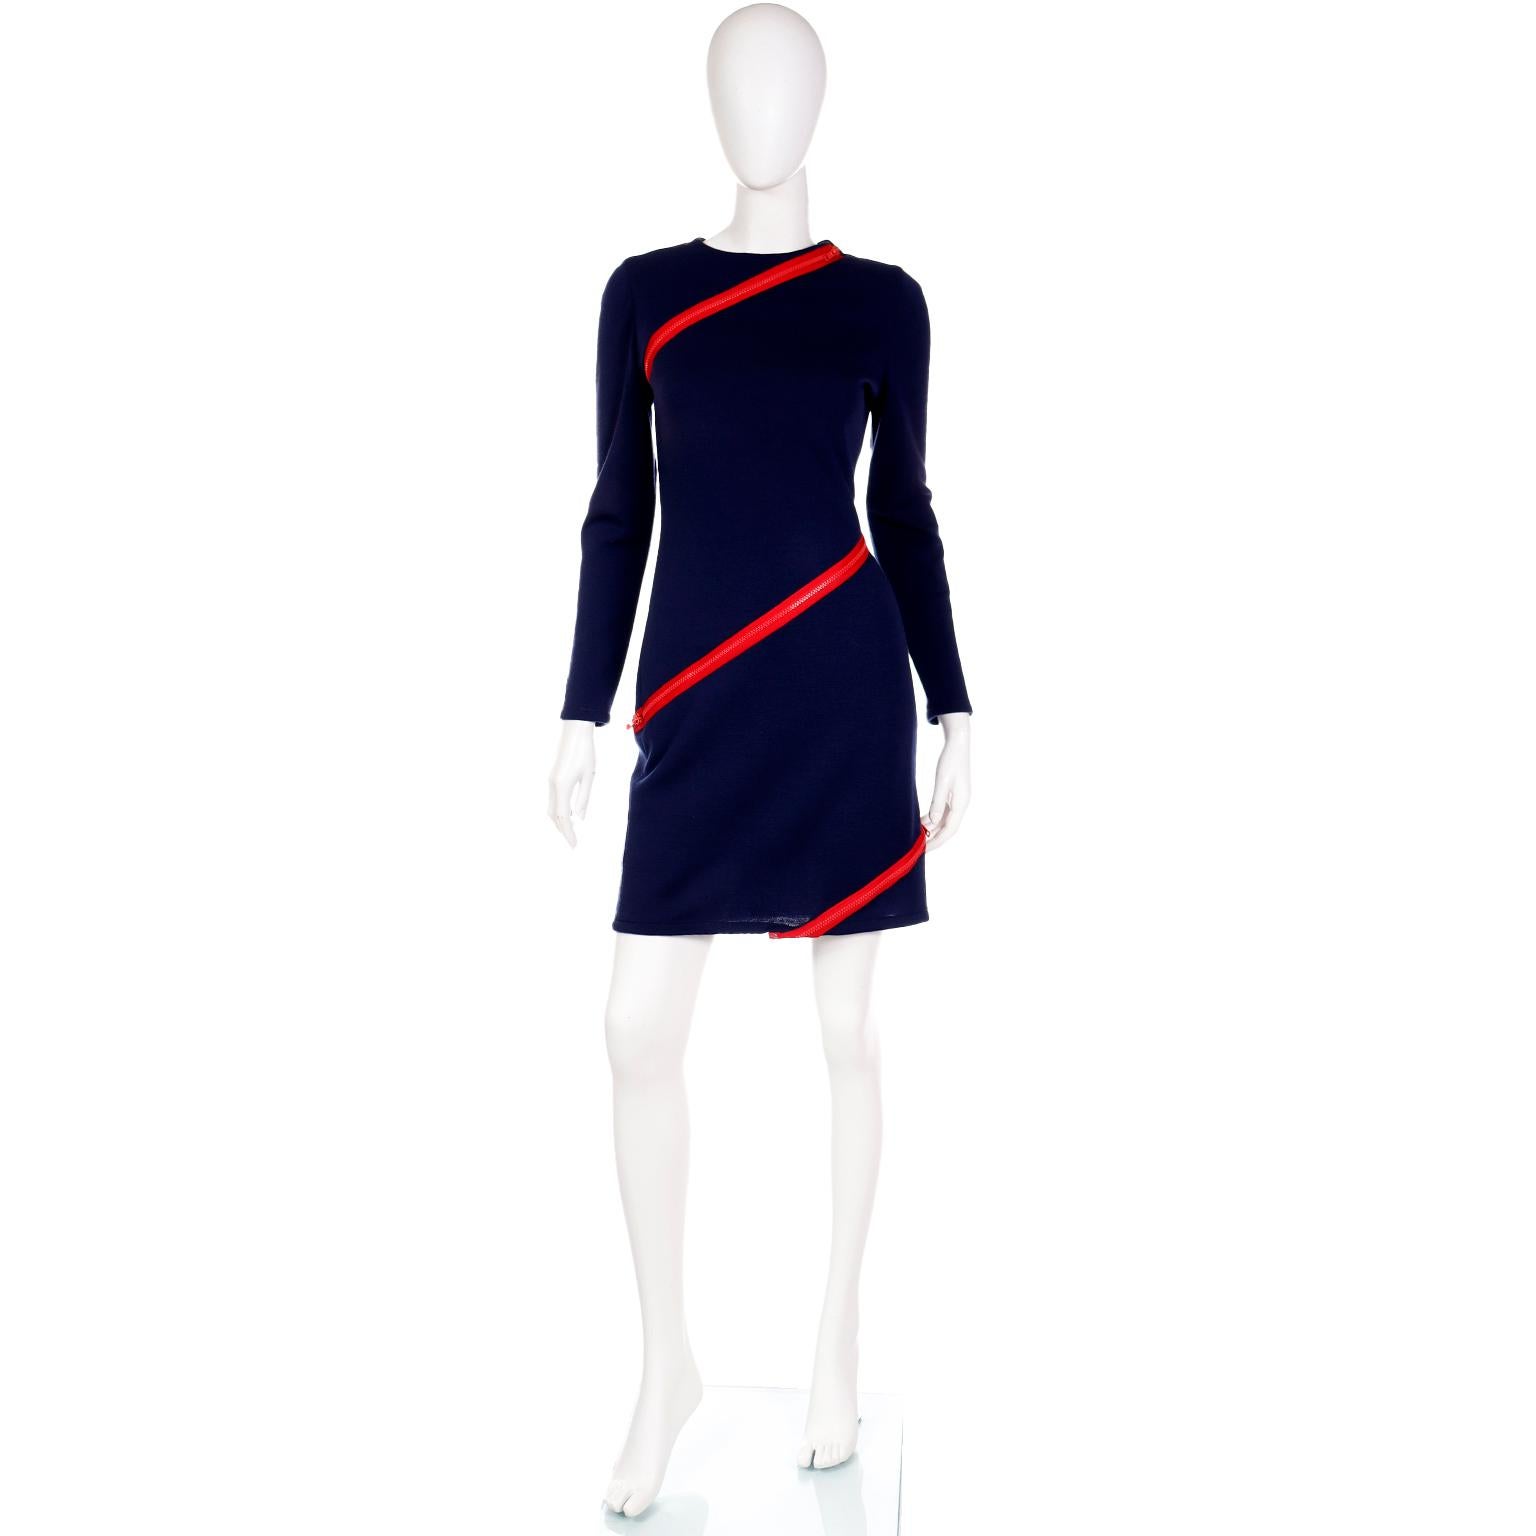 We are obsessed with this incredible vintage Bill Blass zipper dress! This fun dress is in a deep navy blue knit and it features contrasting red zippers sewn diagonally across the dress! The zippers are functional and can be worn partially unzipped